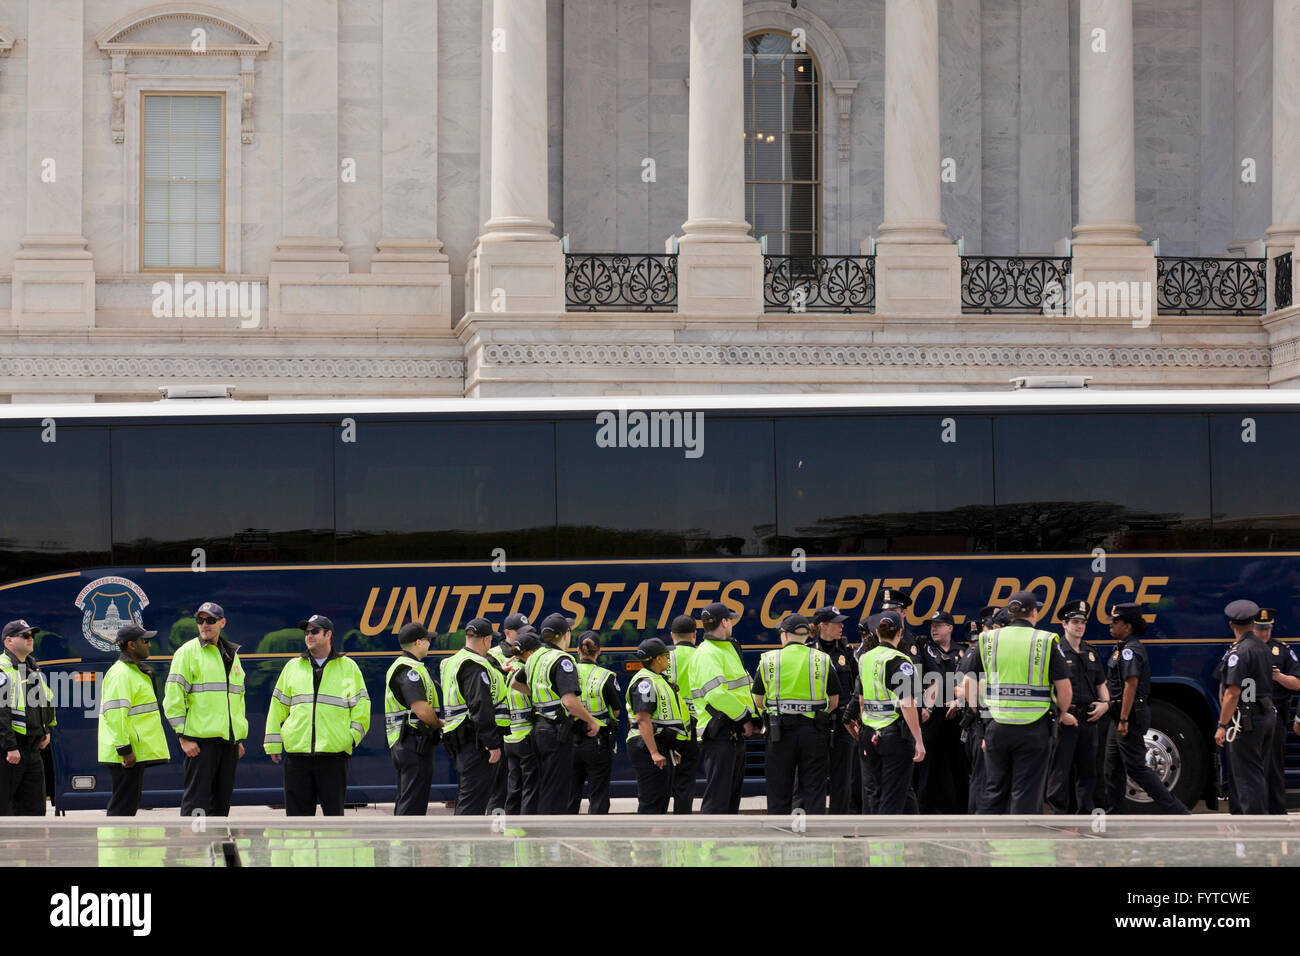 US Capitol Police preparing for a protest rally - Washington, DC USA Stock Photo